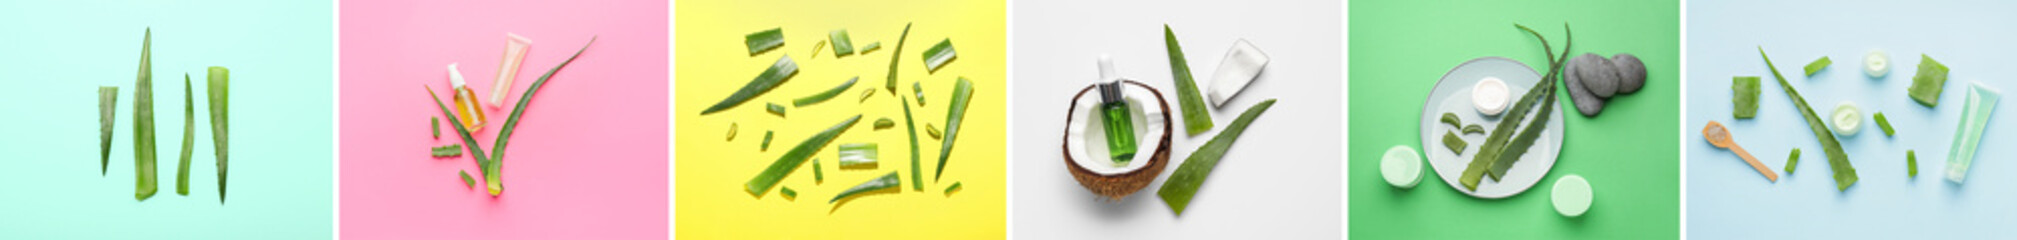 Collage of fresh aloe vera leaves with coconut and natural cosmetic products on color background